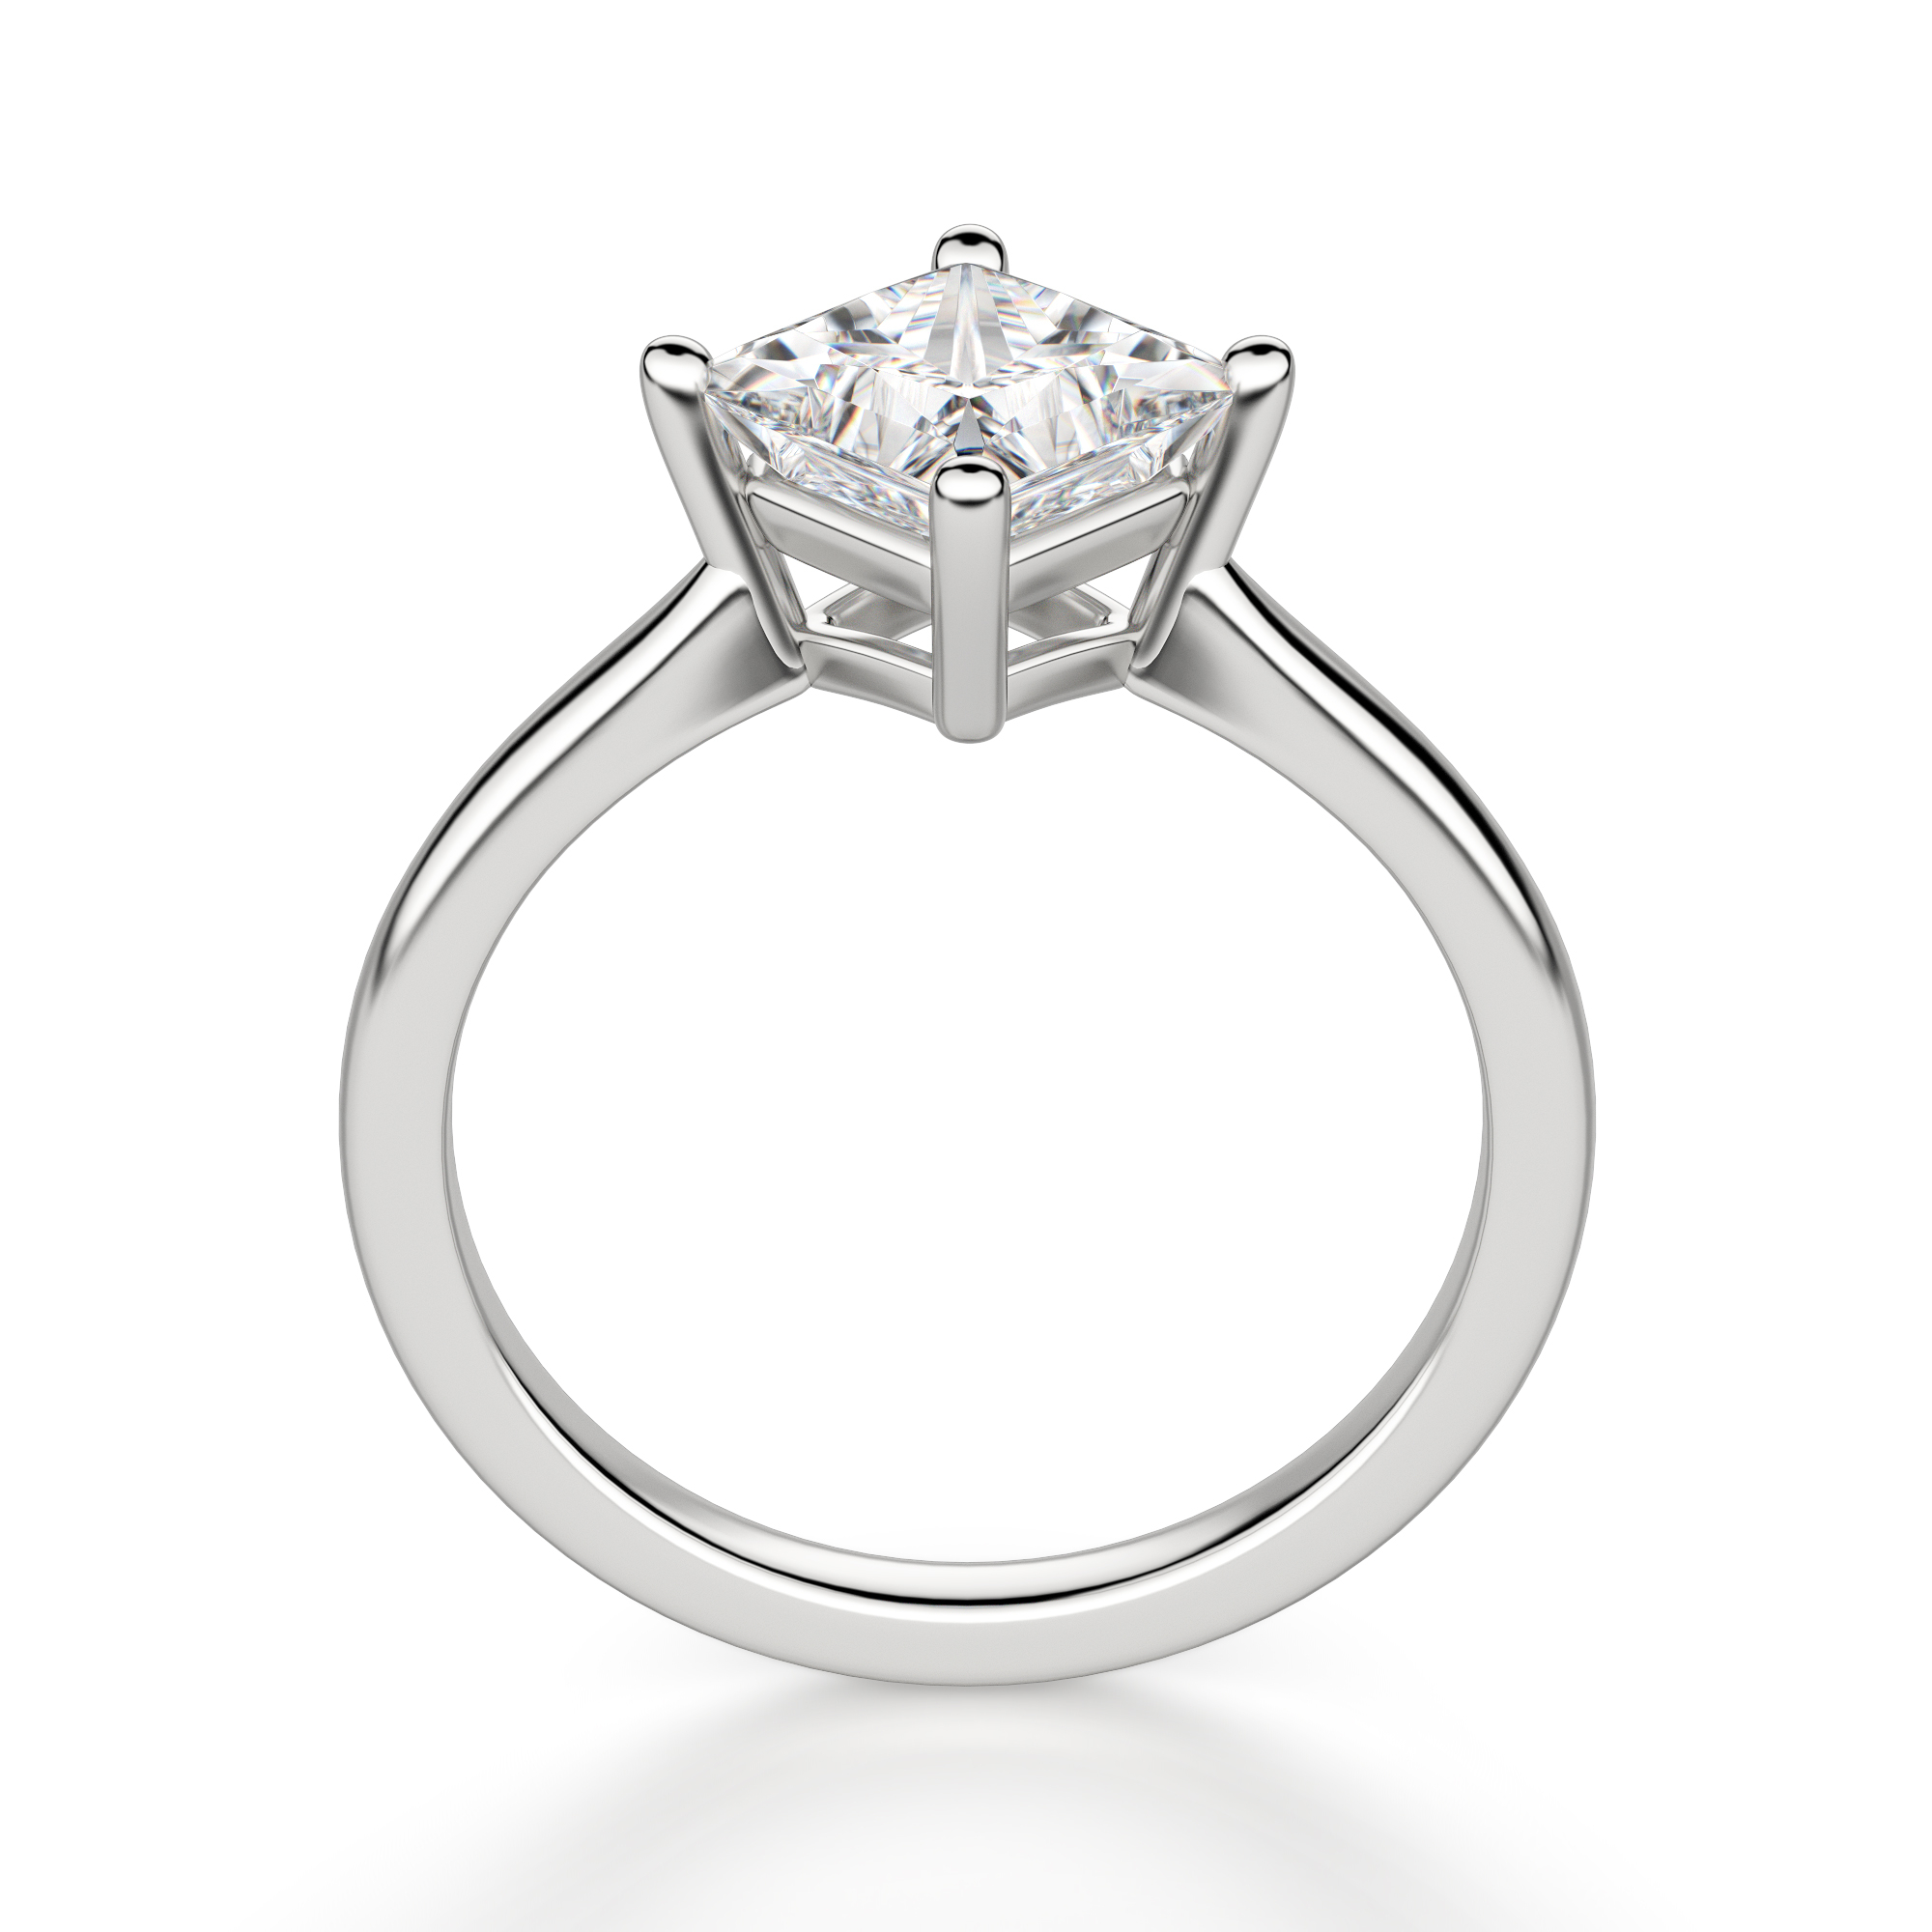 1,133 Engagement Ring 3D Illustrations - Free in PNG, BLEND, glTF -  IconScout